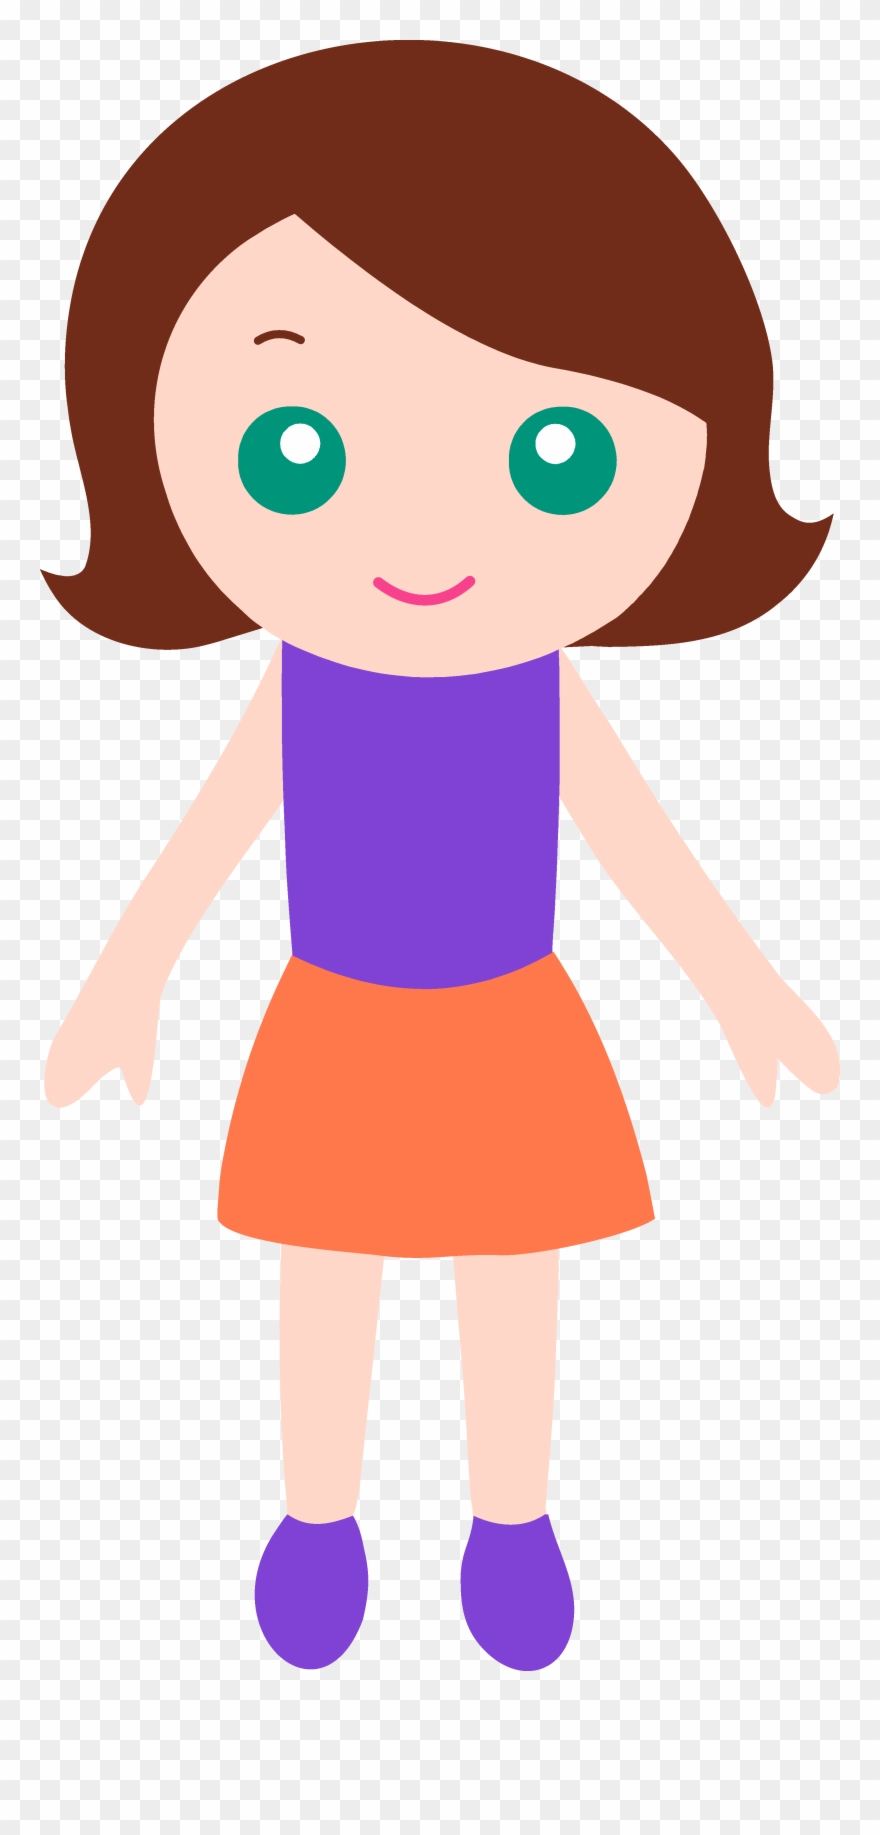 Clipart Of Twins With Brown Hair And Blue Eyes.